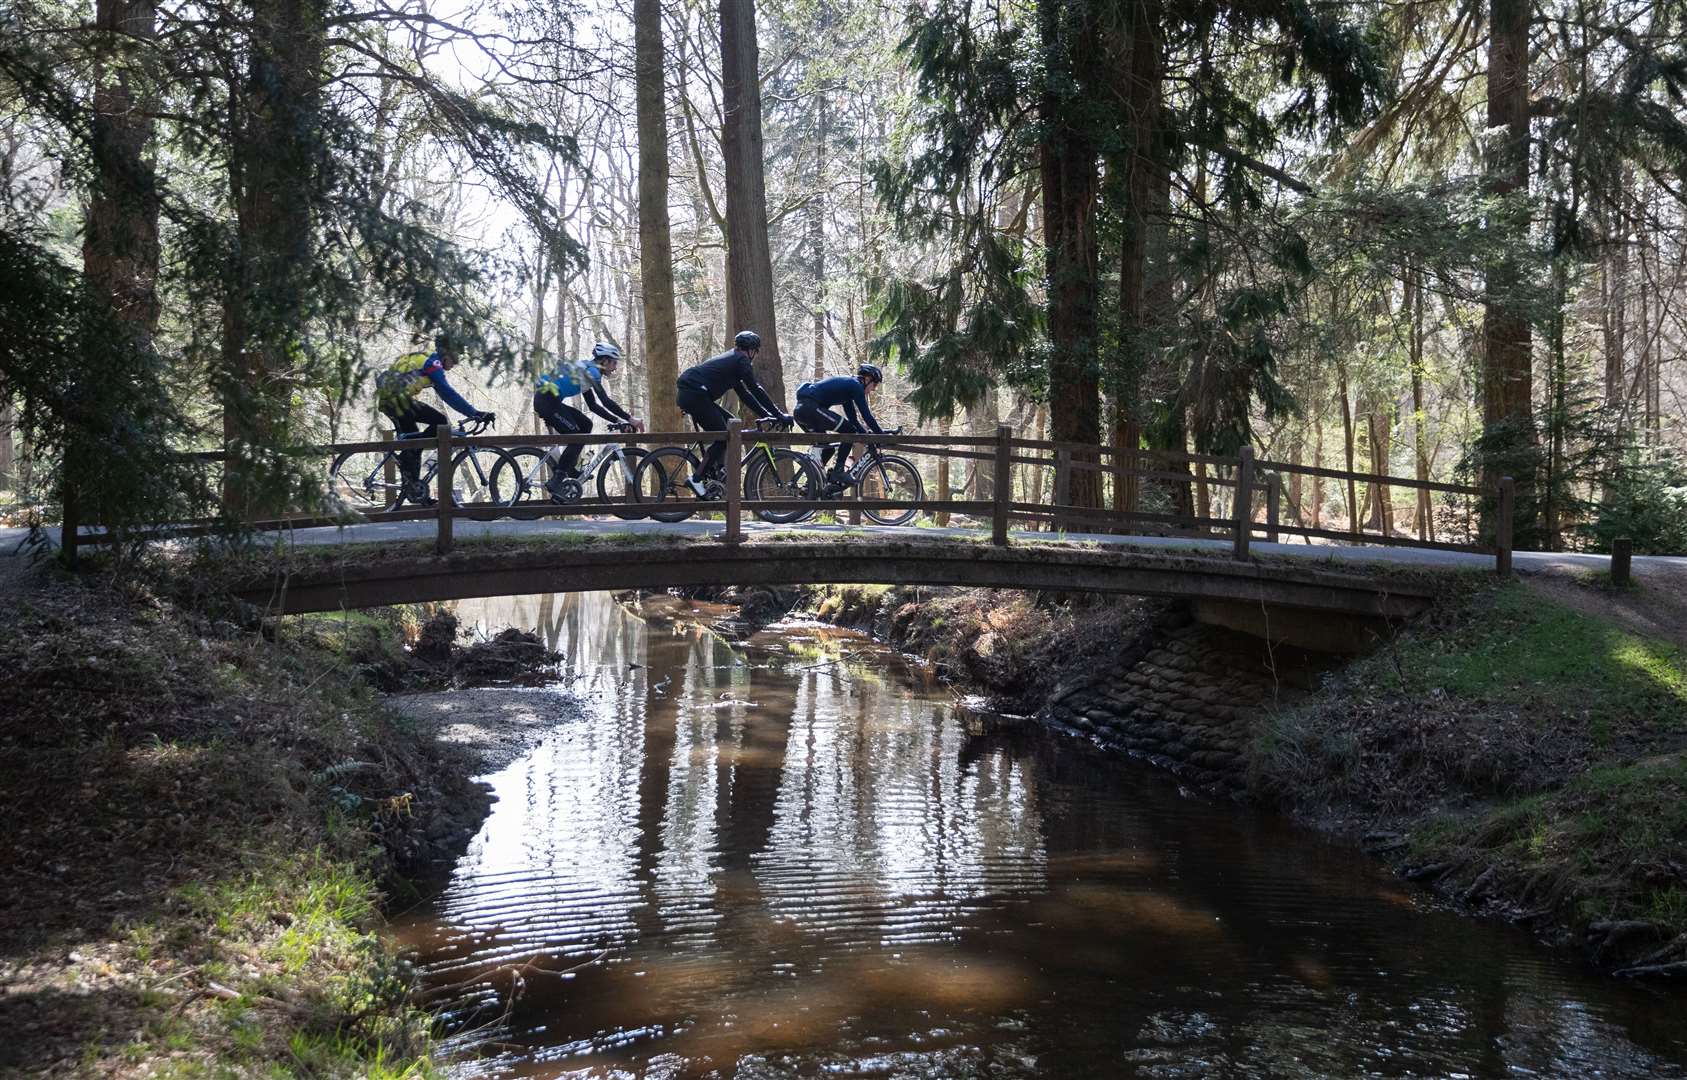 Cyclists cross a bridge over Flechs Water near to Brockenhurst in the New Forest (Andrew Matthews/PA)